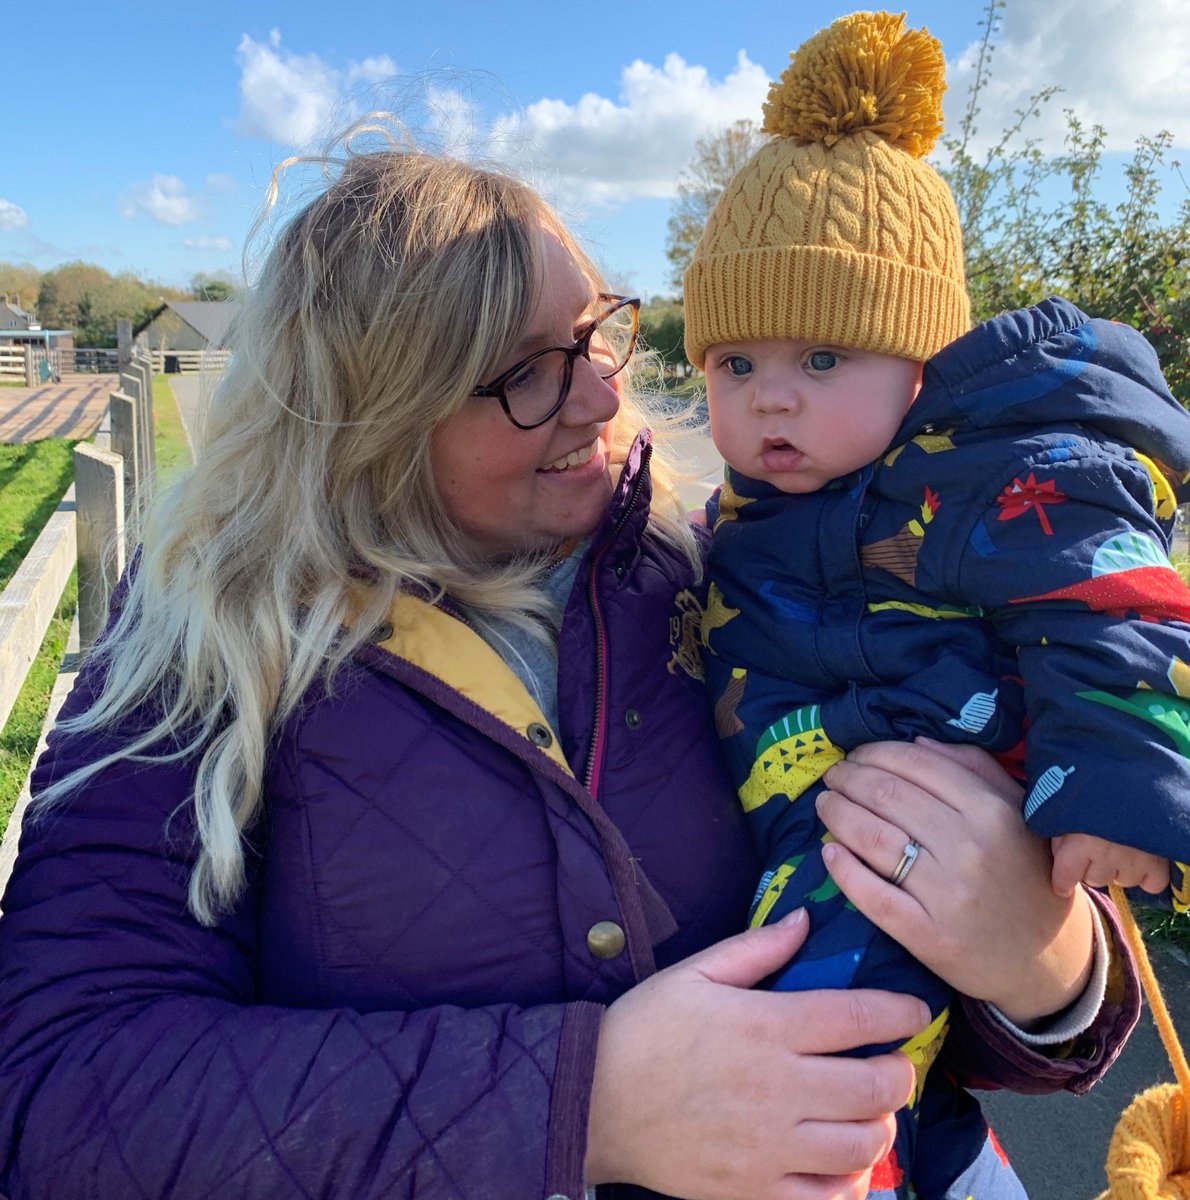 Meg opens up about the shame she experienced from healthcare professionals when she was given a gestational diabetes diagnosis: orlo.uk/2i6XG 

#DiabetesSWSC #SouthWest #GestationalDiabetes